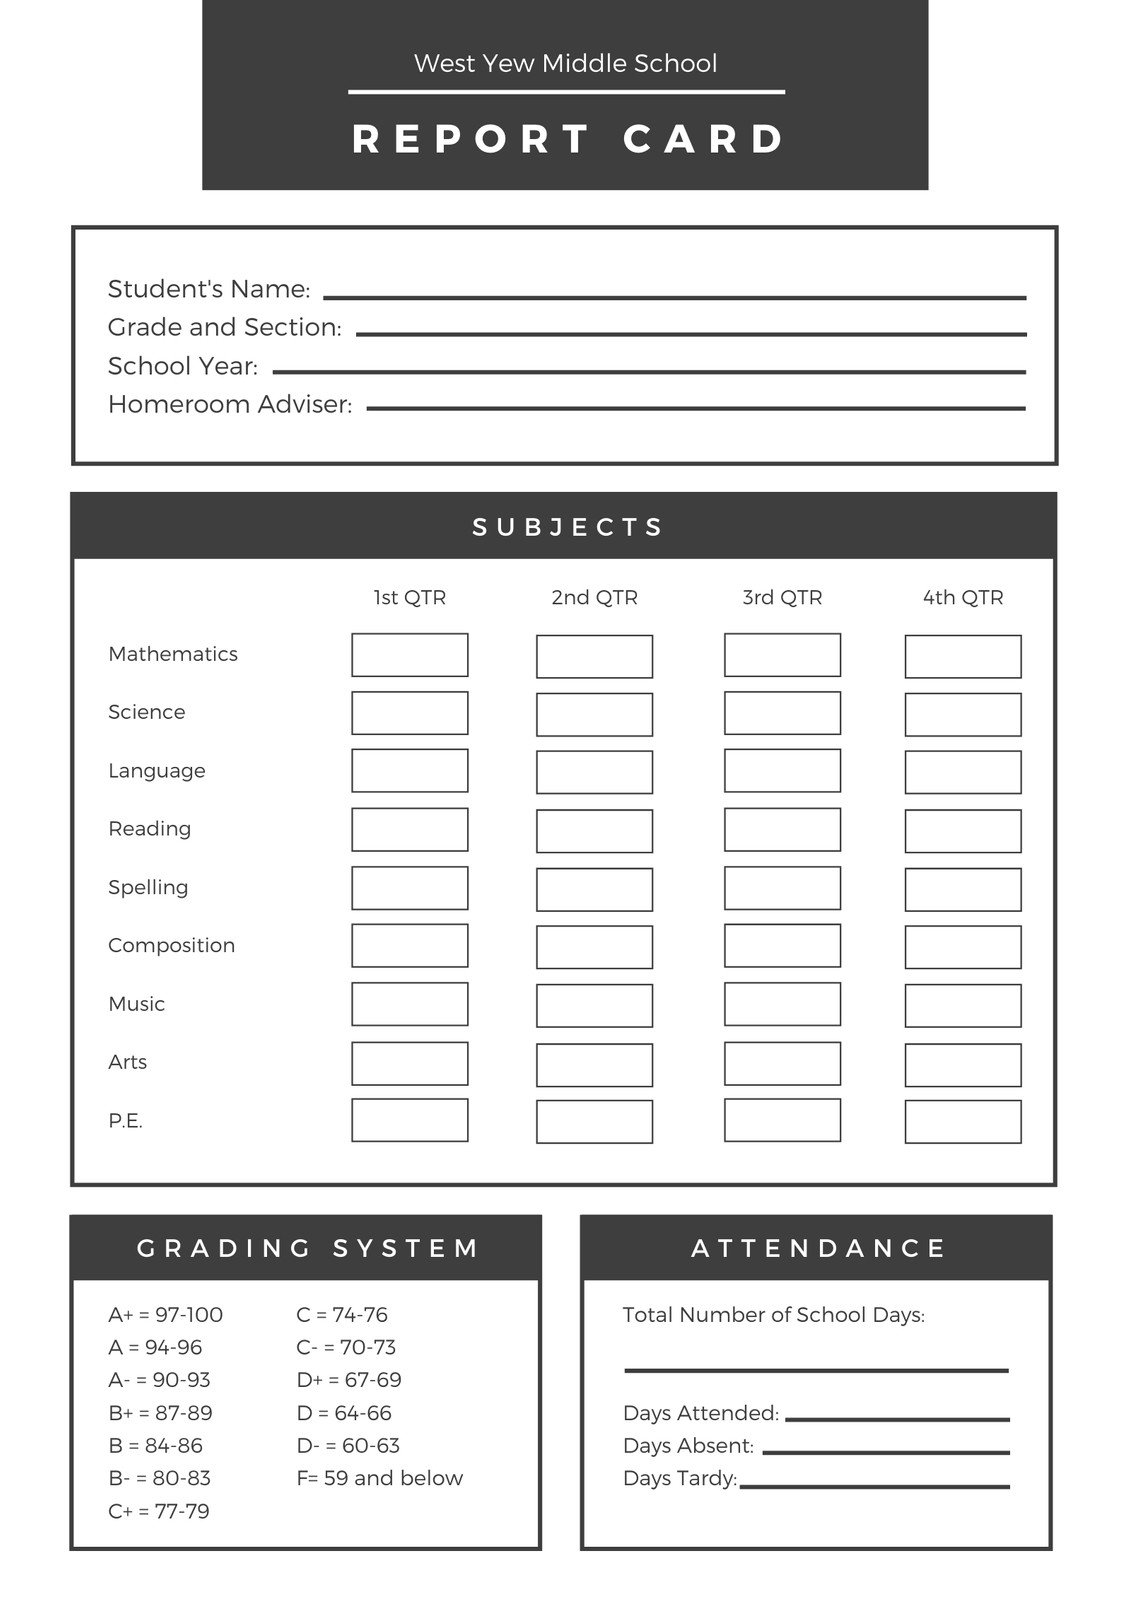 Customize 21+ Middle School Report Cards Templates Online - Canva With Regard To Homeschool Report Card Template Middle School